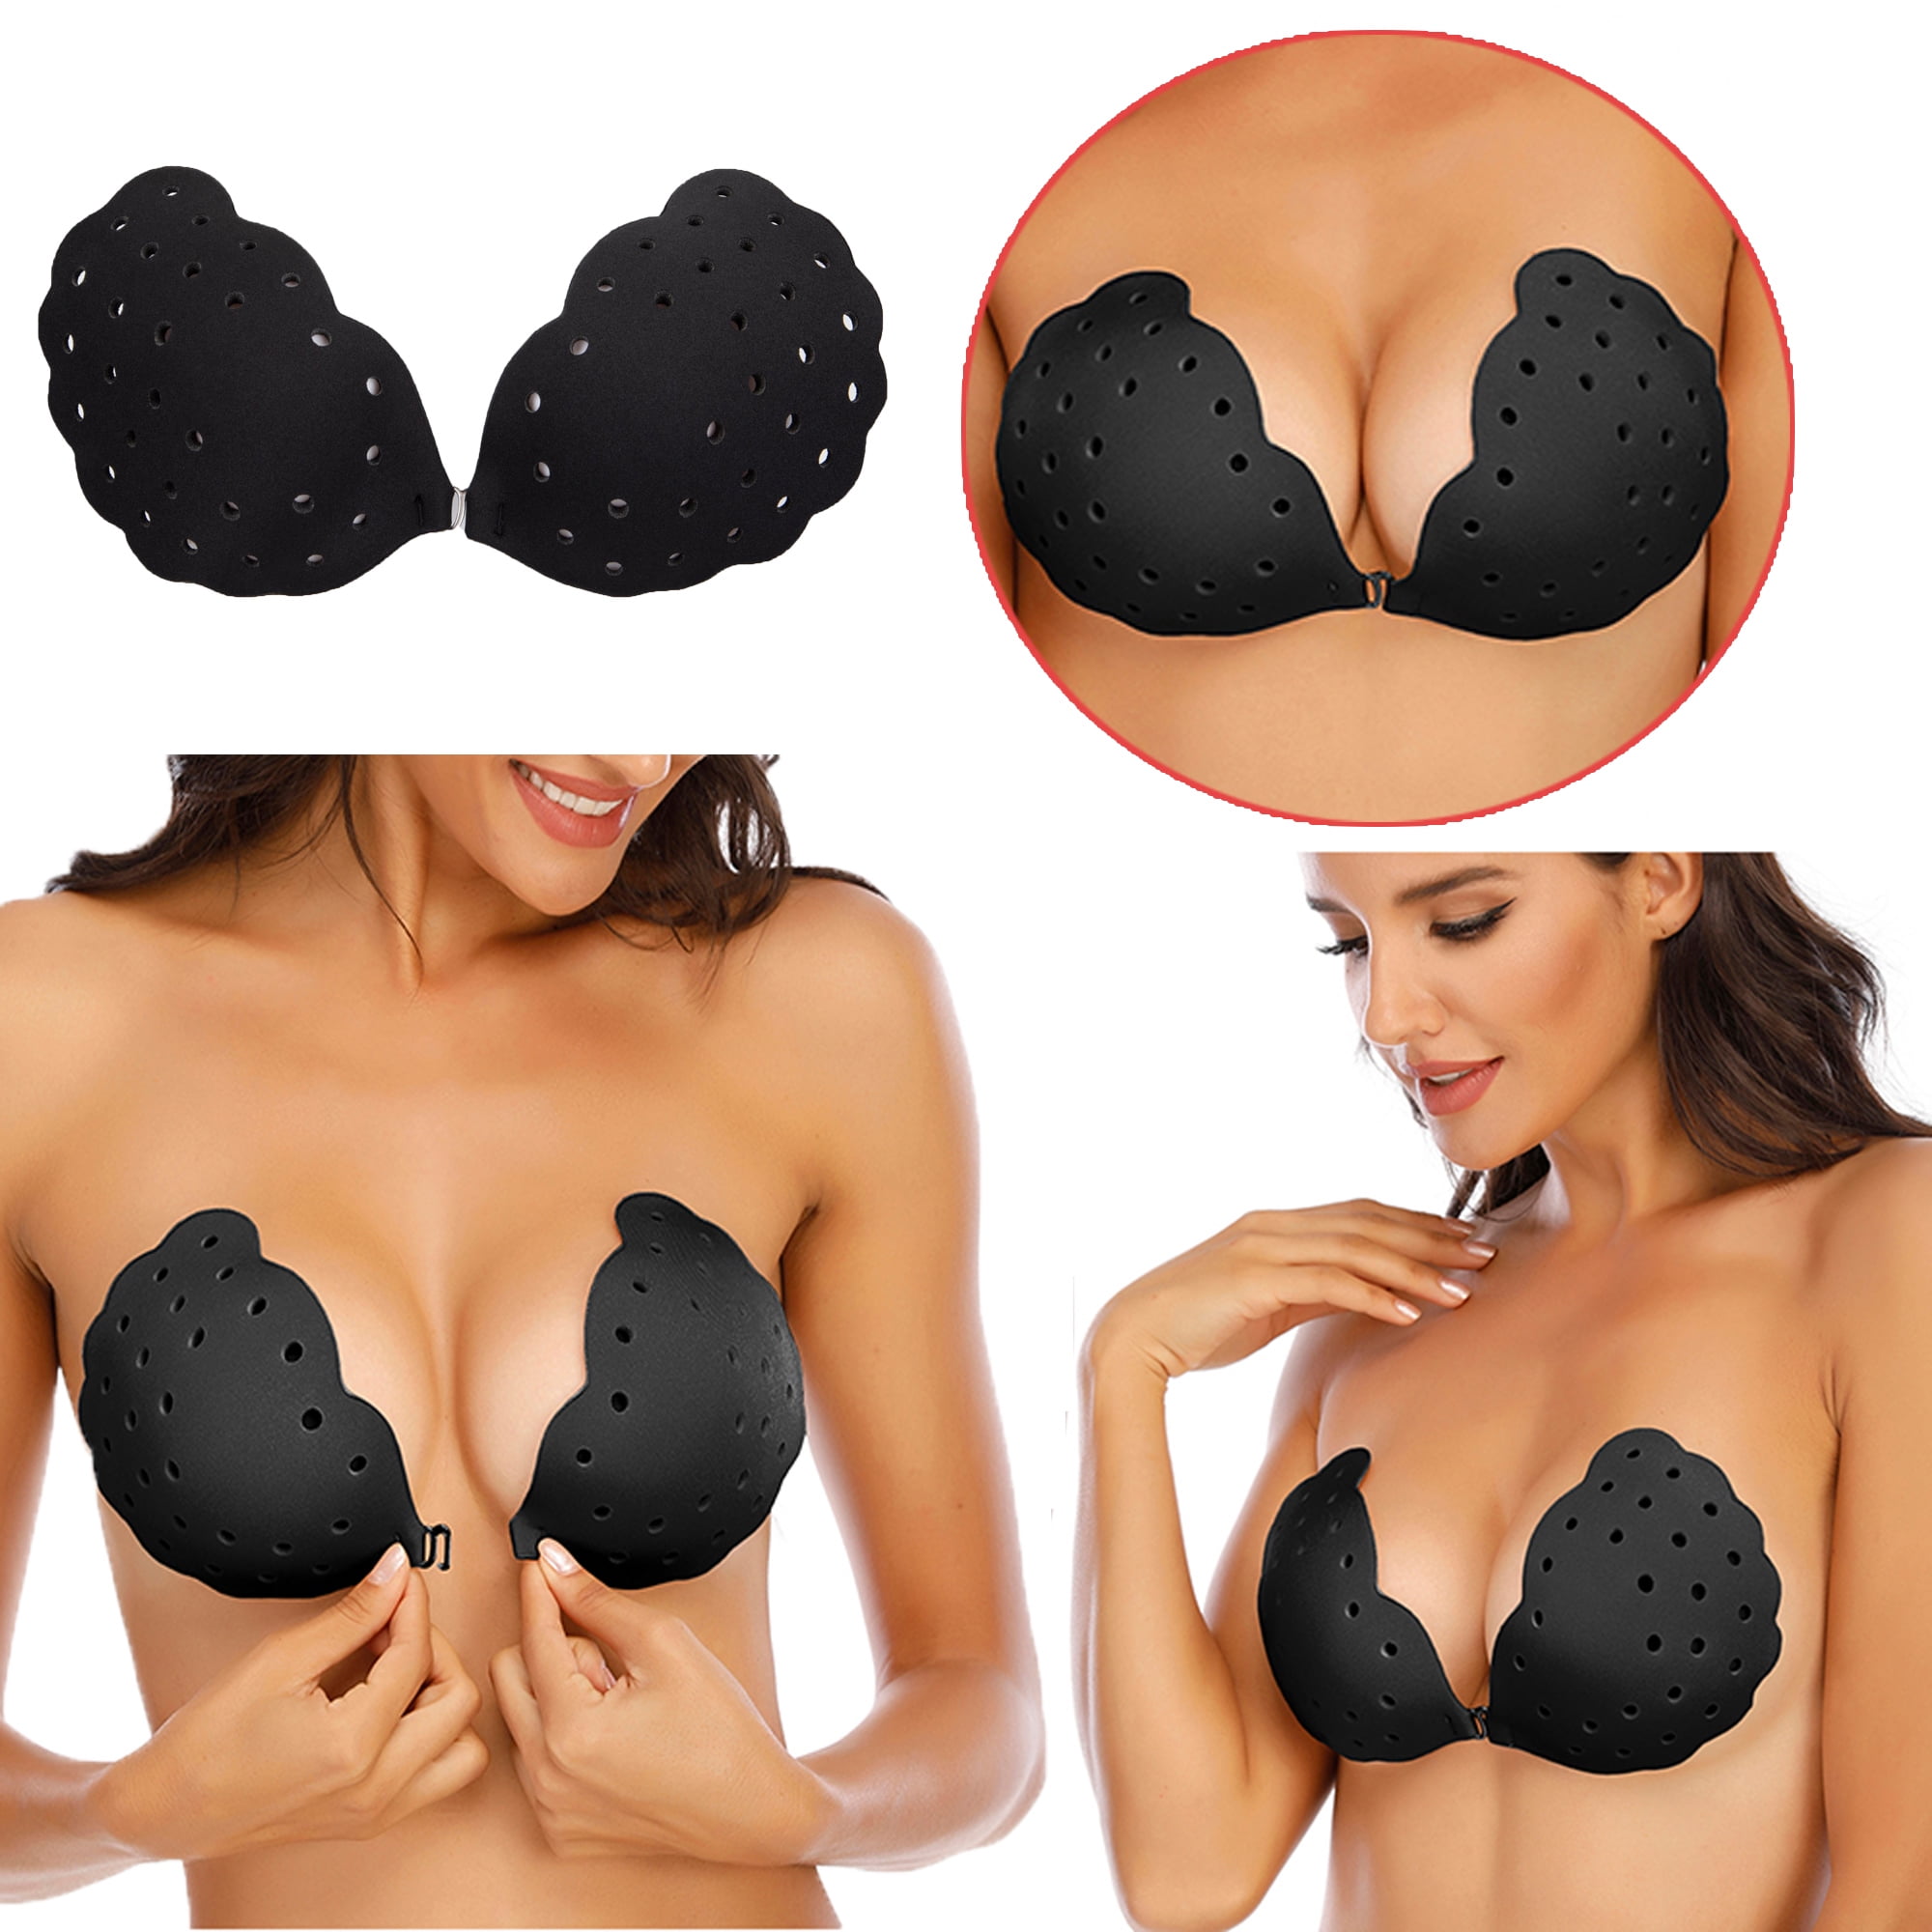 Invisible Push Up Silicone Pads Bra Cover